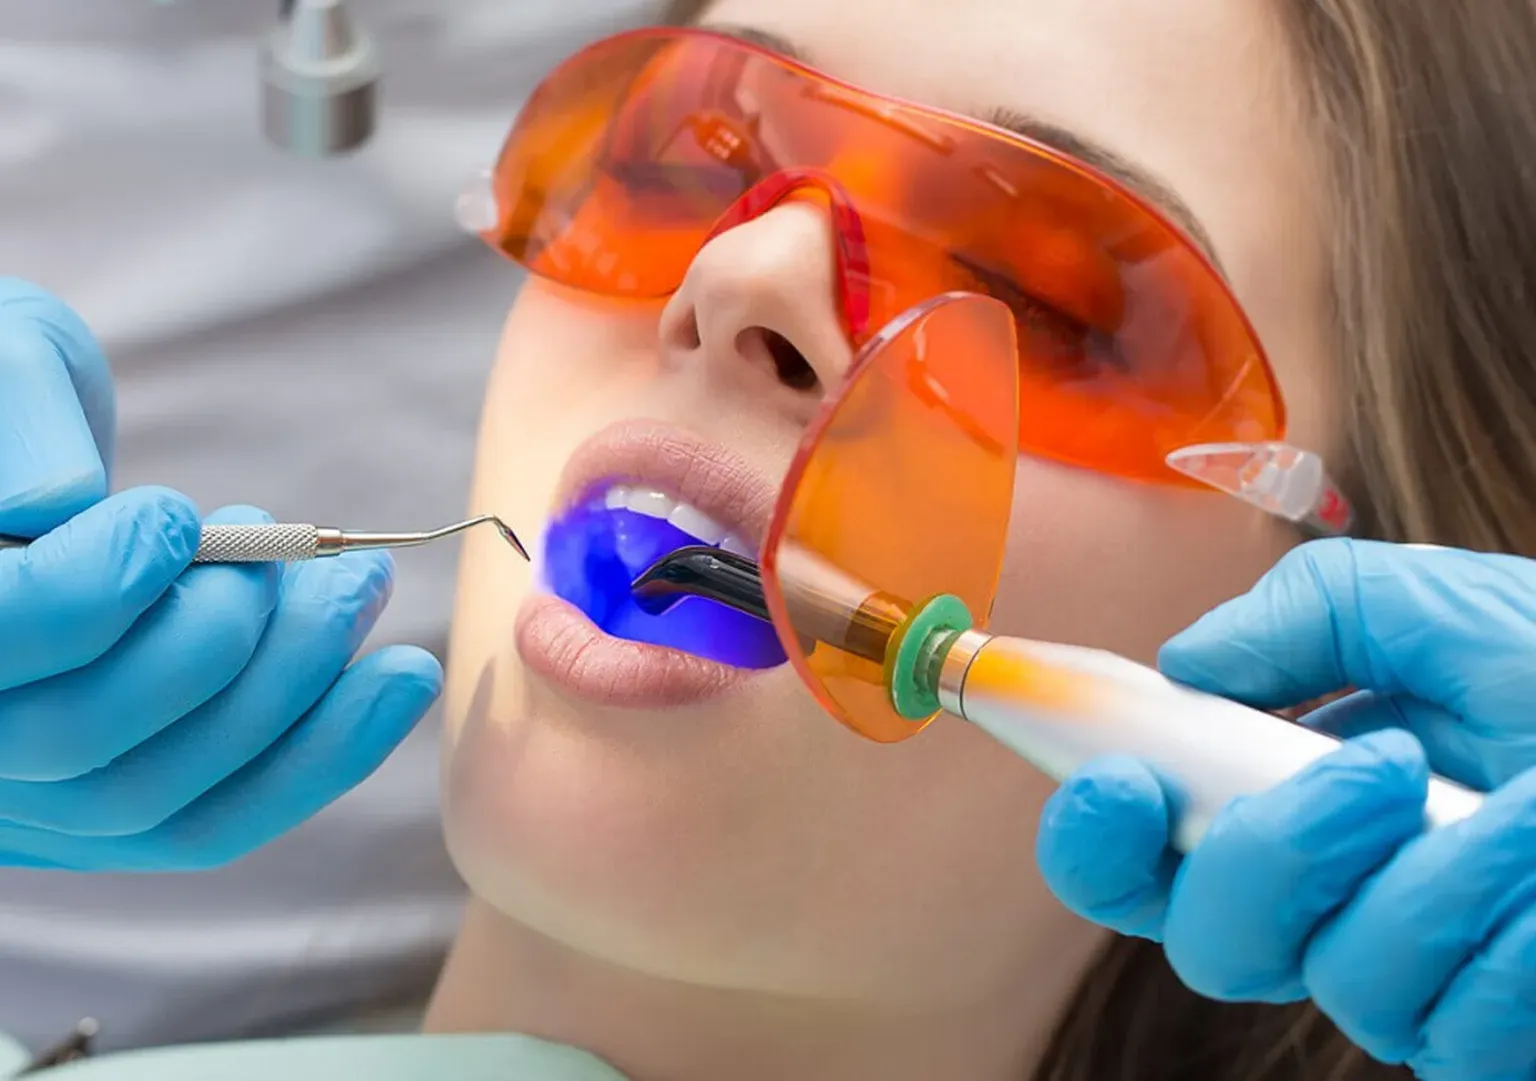 Discover The Benefits Of The Biolase Dental Laser In Newport Beach, California